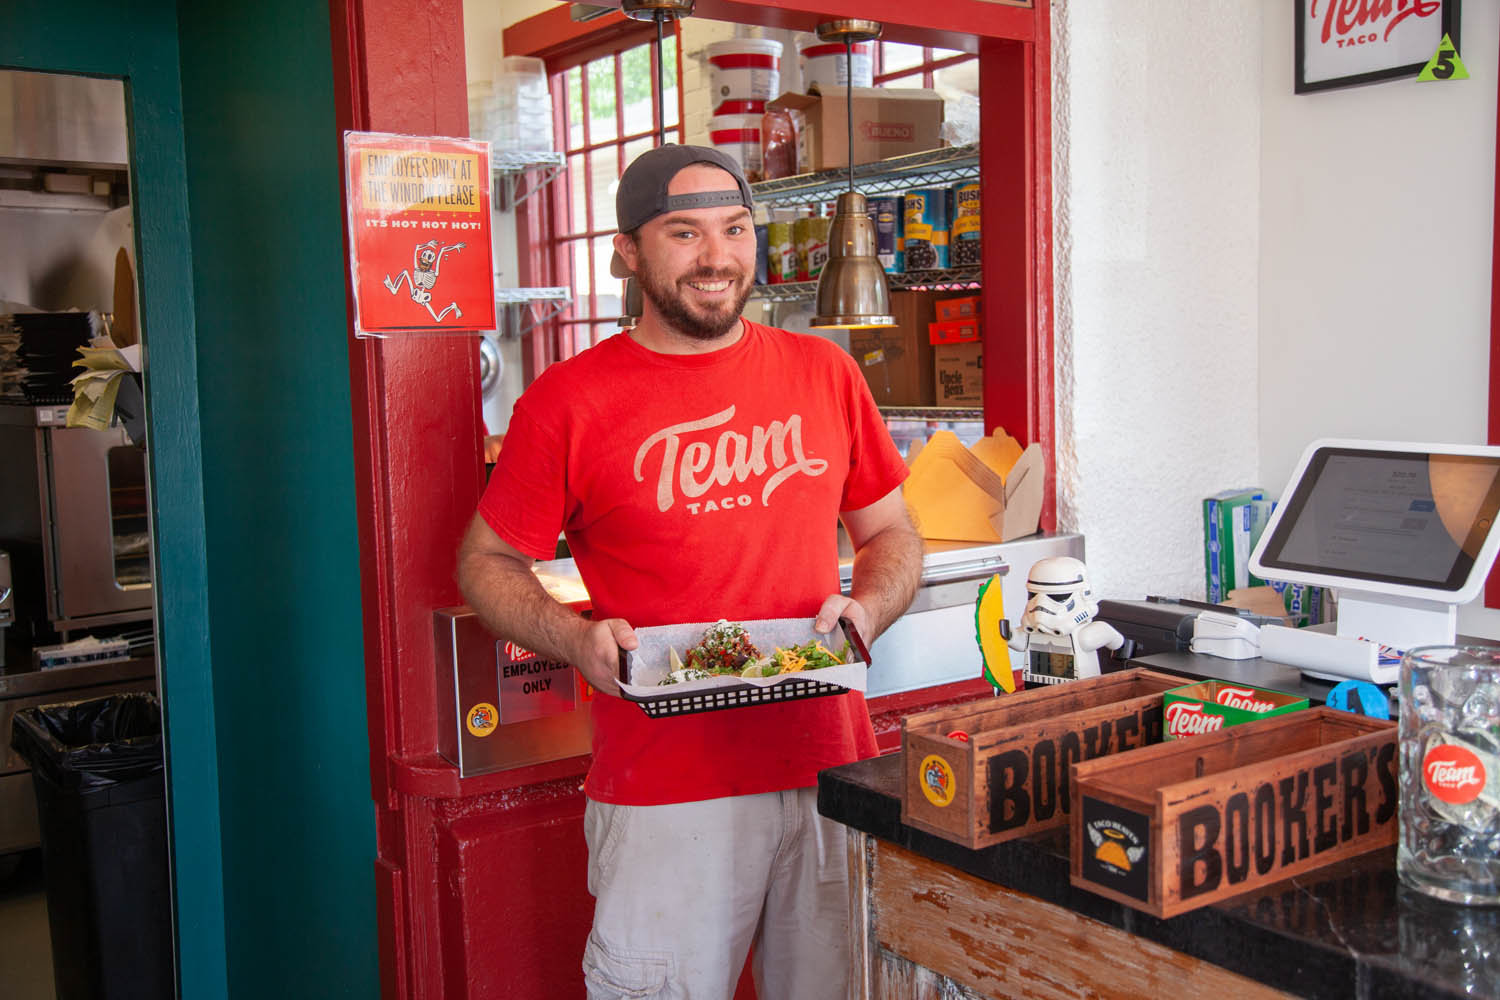 Co-owner Cary Harris opened Team Taco in August.